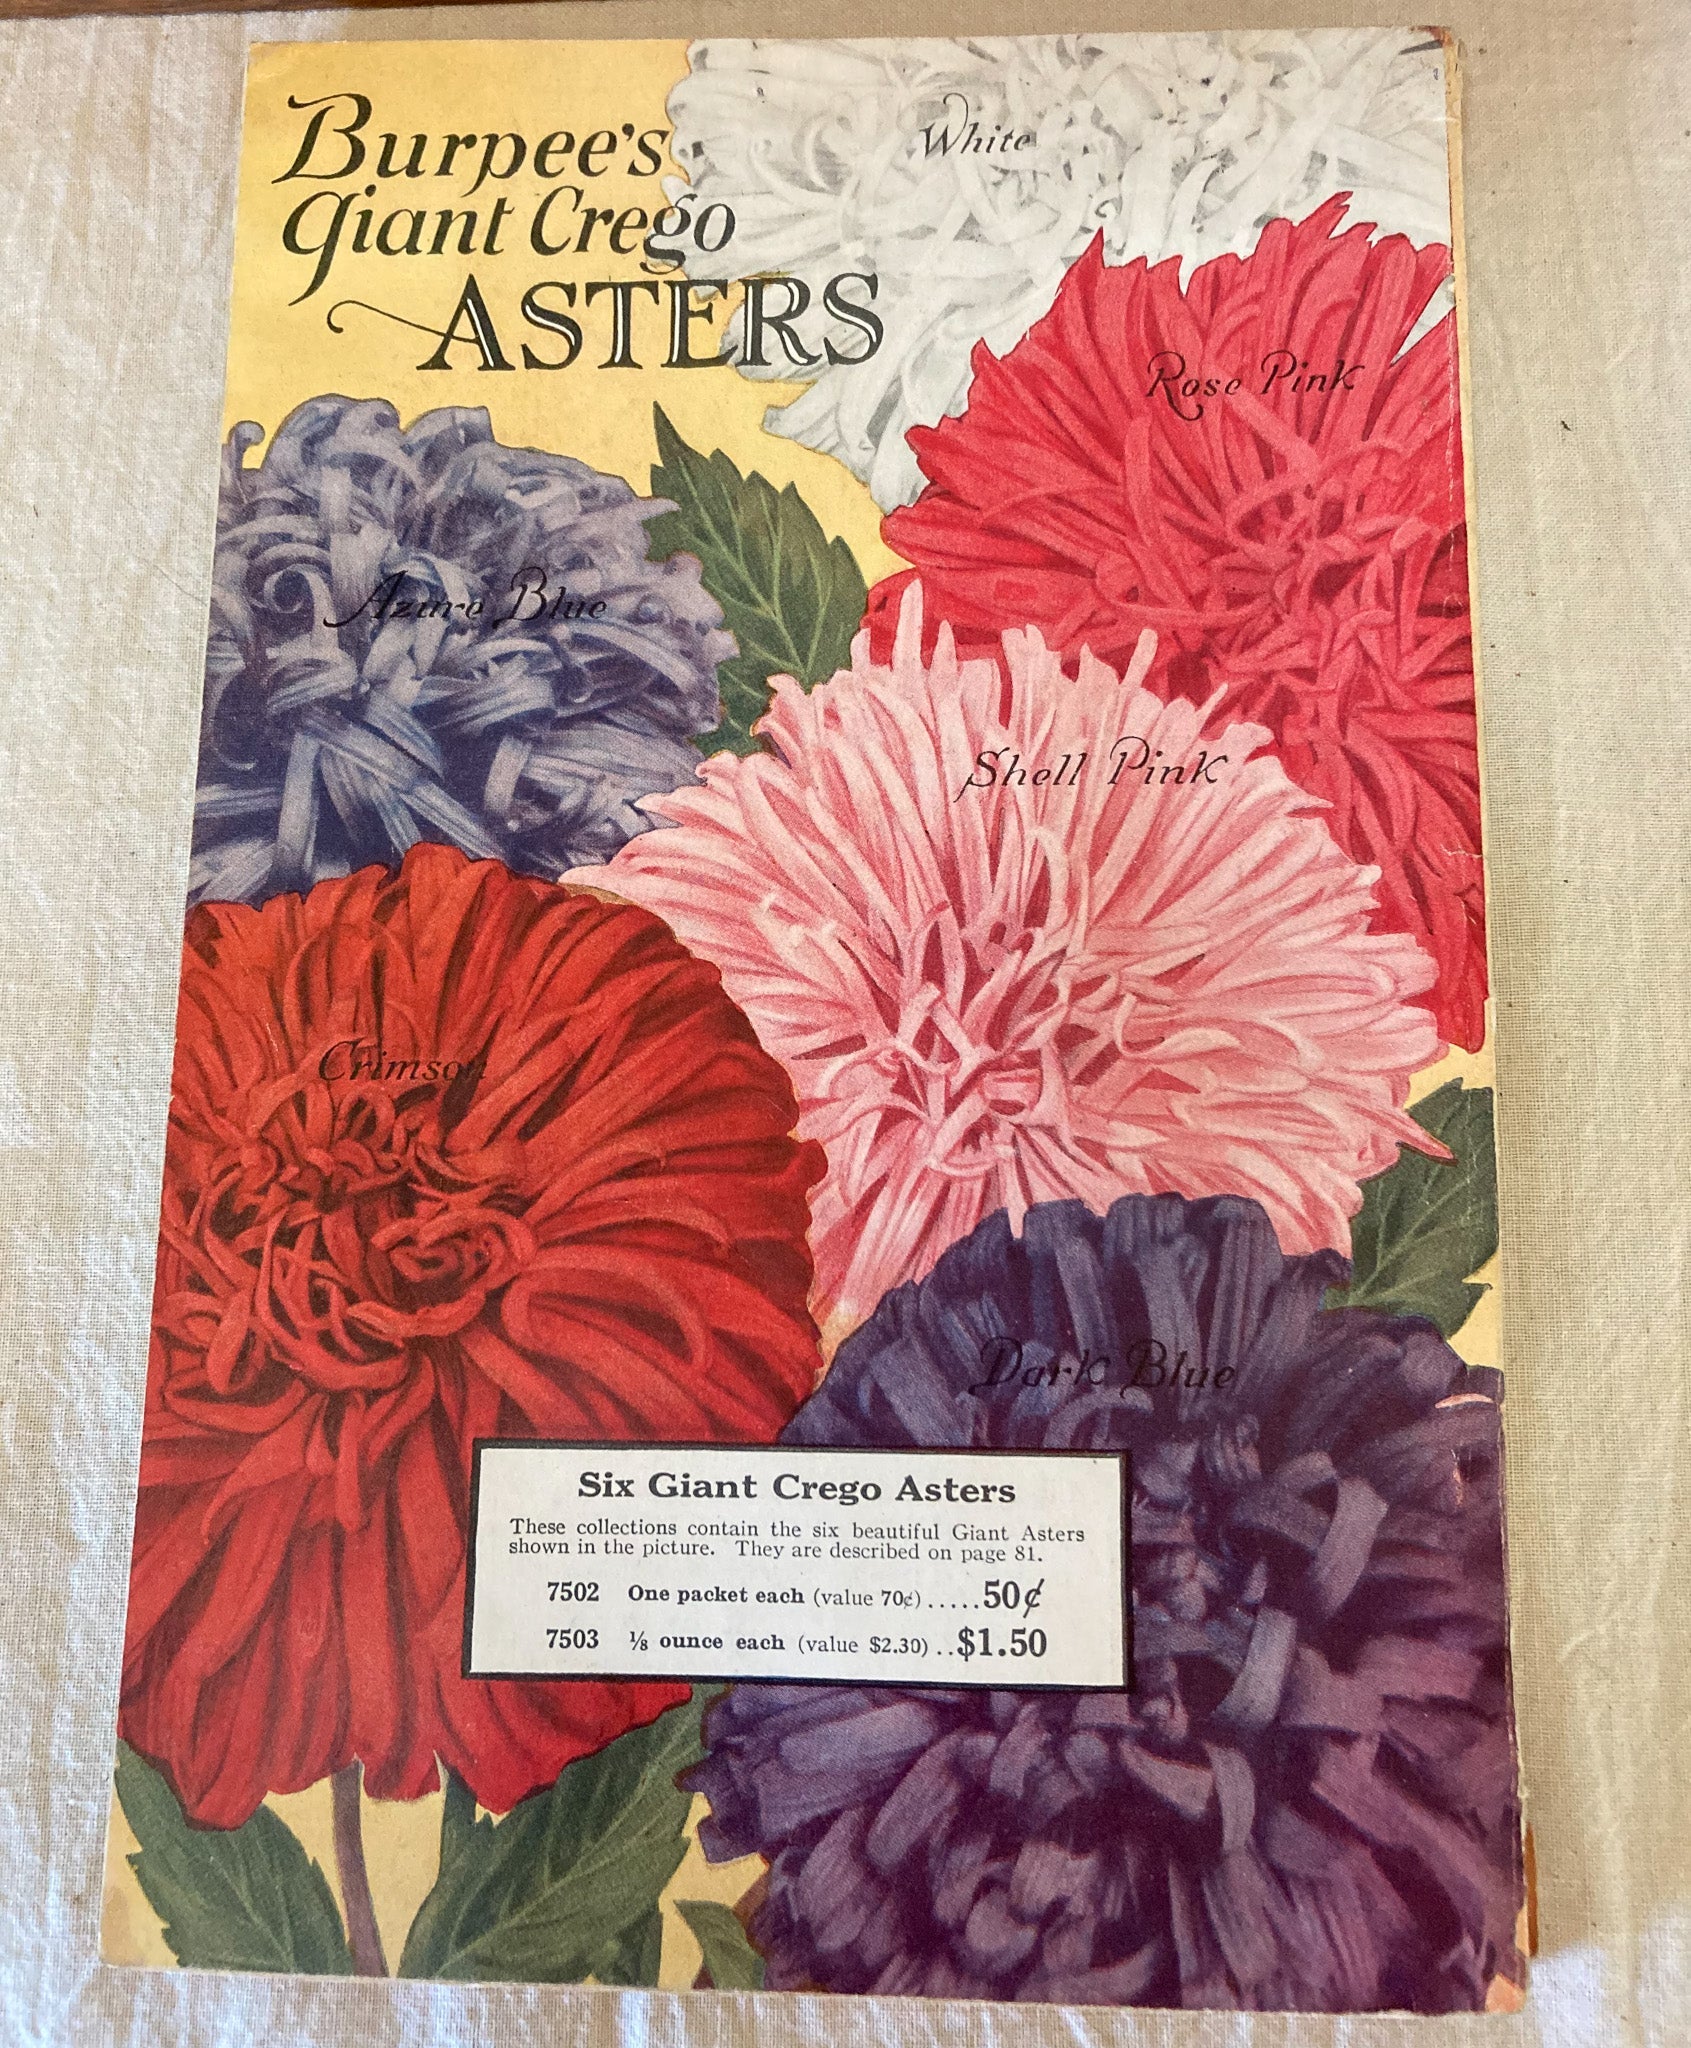 Early 1900’s Flower Seed Box, 1914 Choice Flower Seeds Catalog and 1927 Burpee’s Seed Catalog